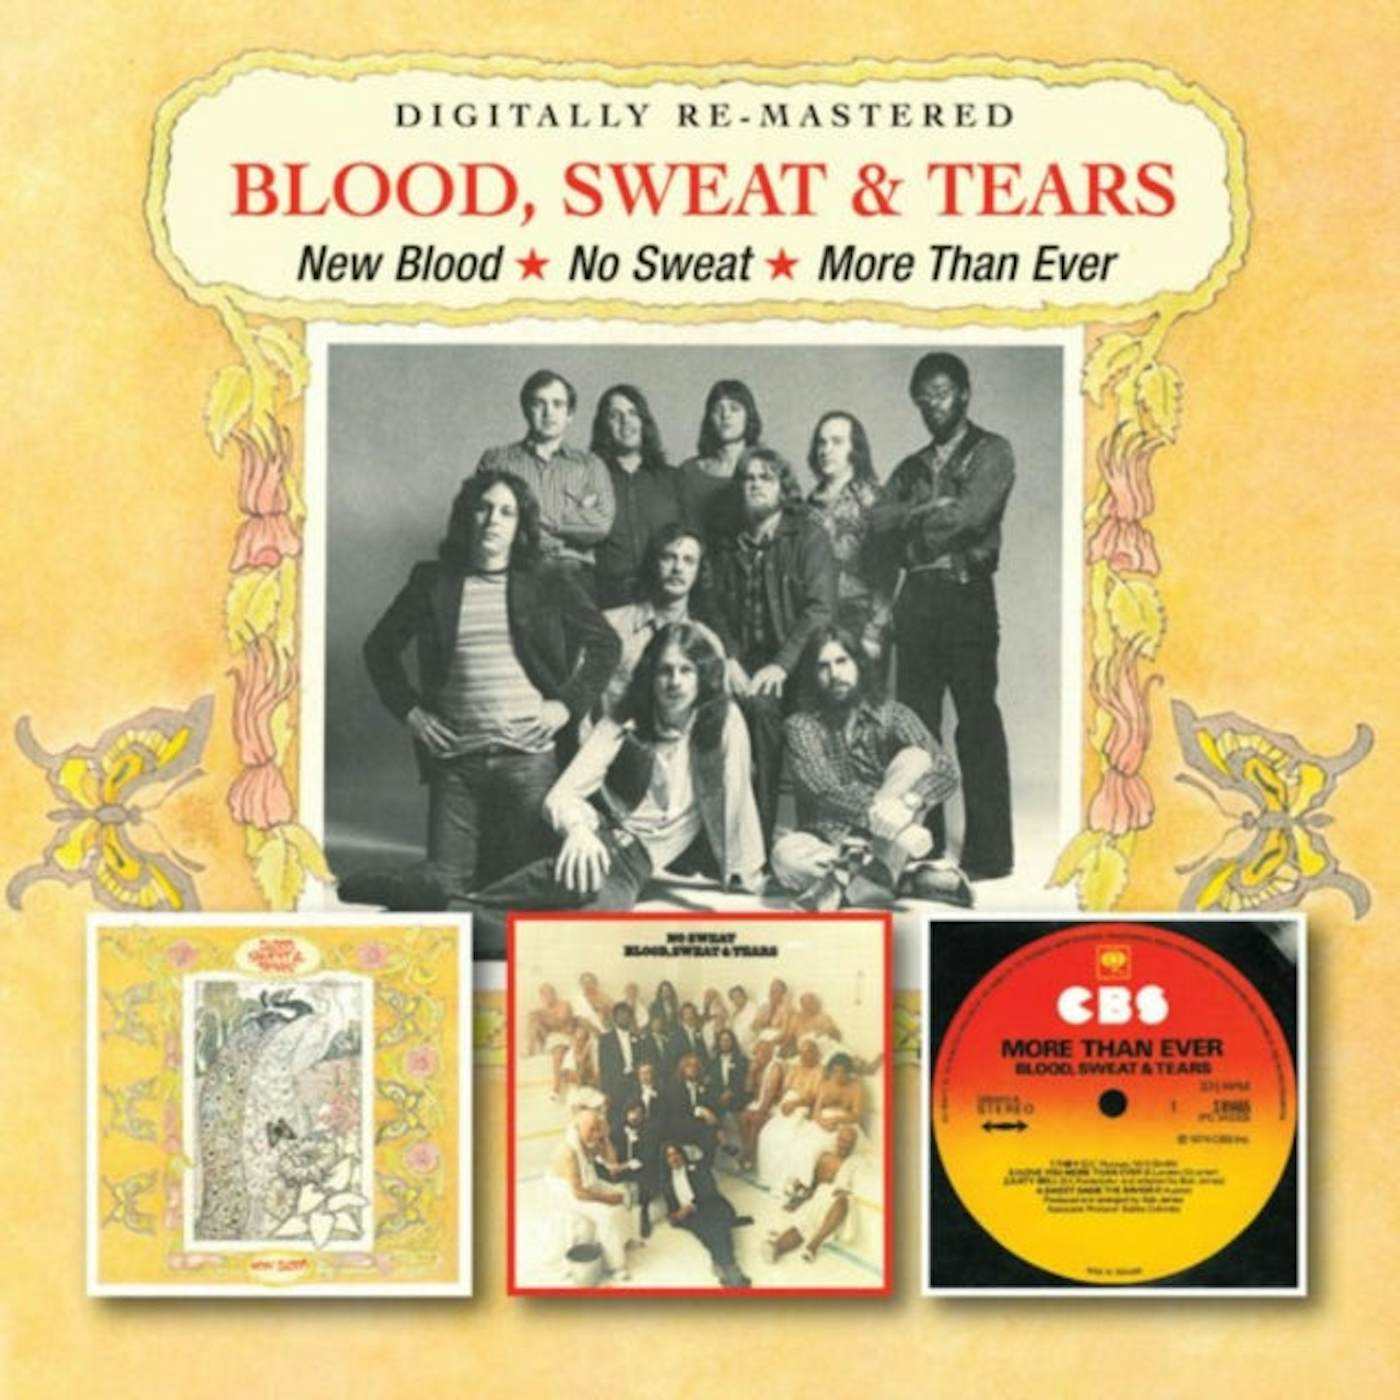 Blood, Sweat & Tears Blood / No Sweat / More Than Ever CD